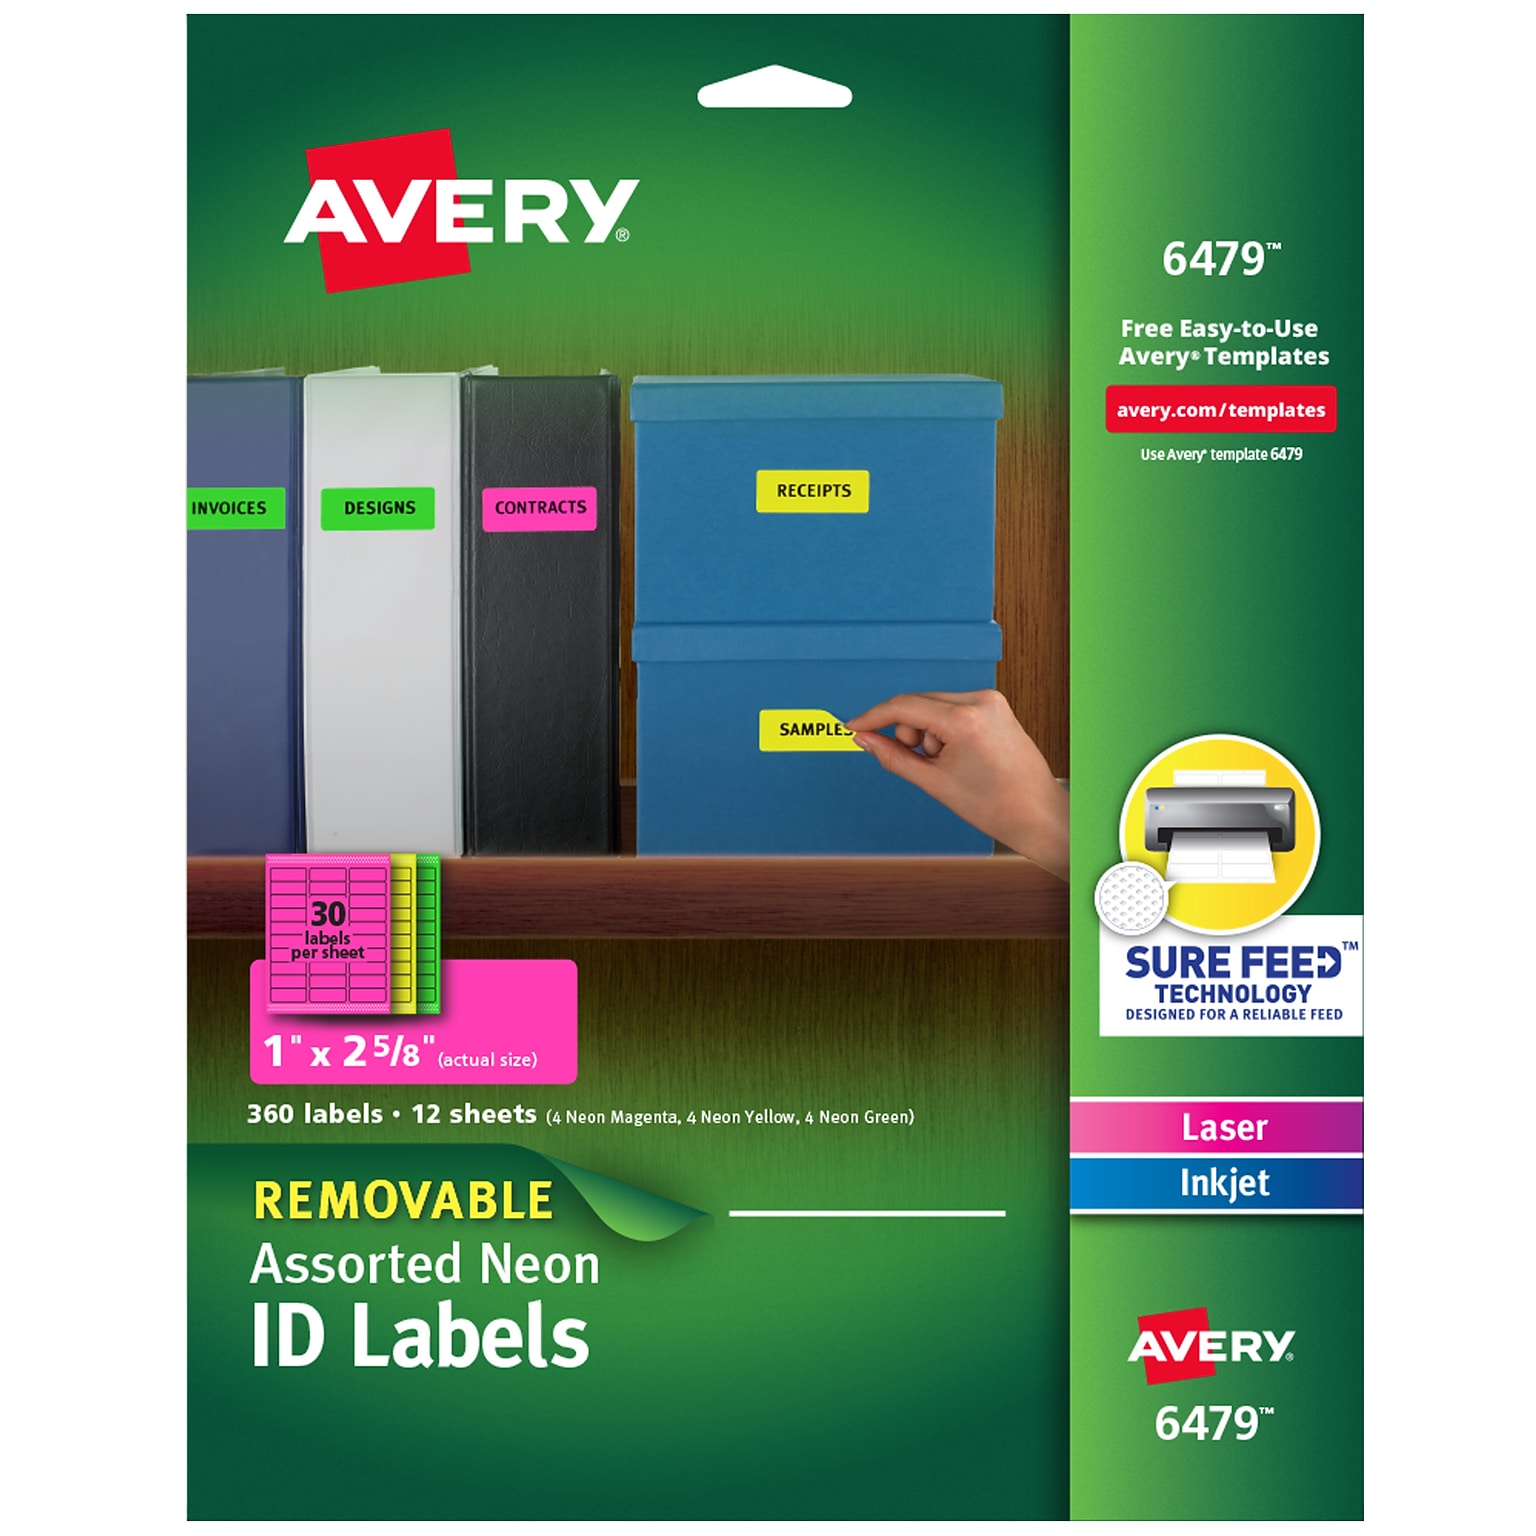 Avery Laser/Inkjet Identification Labels, 1 x 2 5/8, Assorted Neon Colors, 30/Sheet, 12 Sheets/Pack (6479)